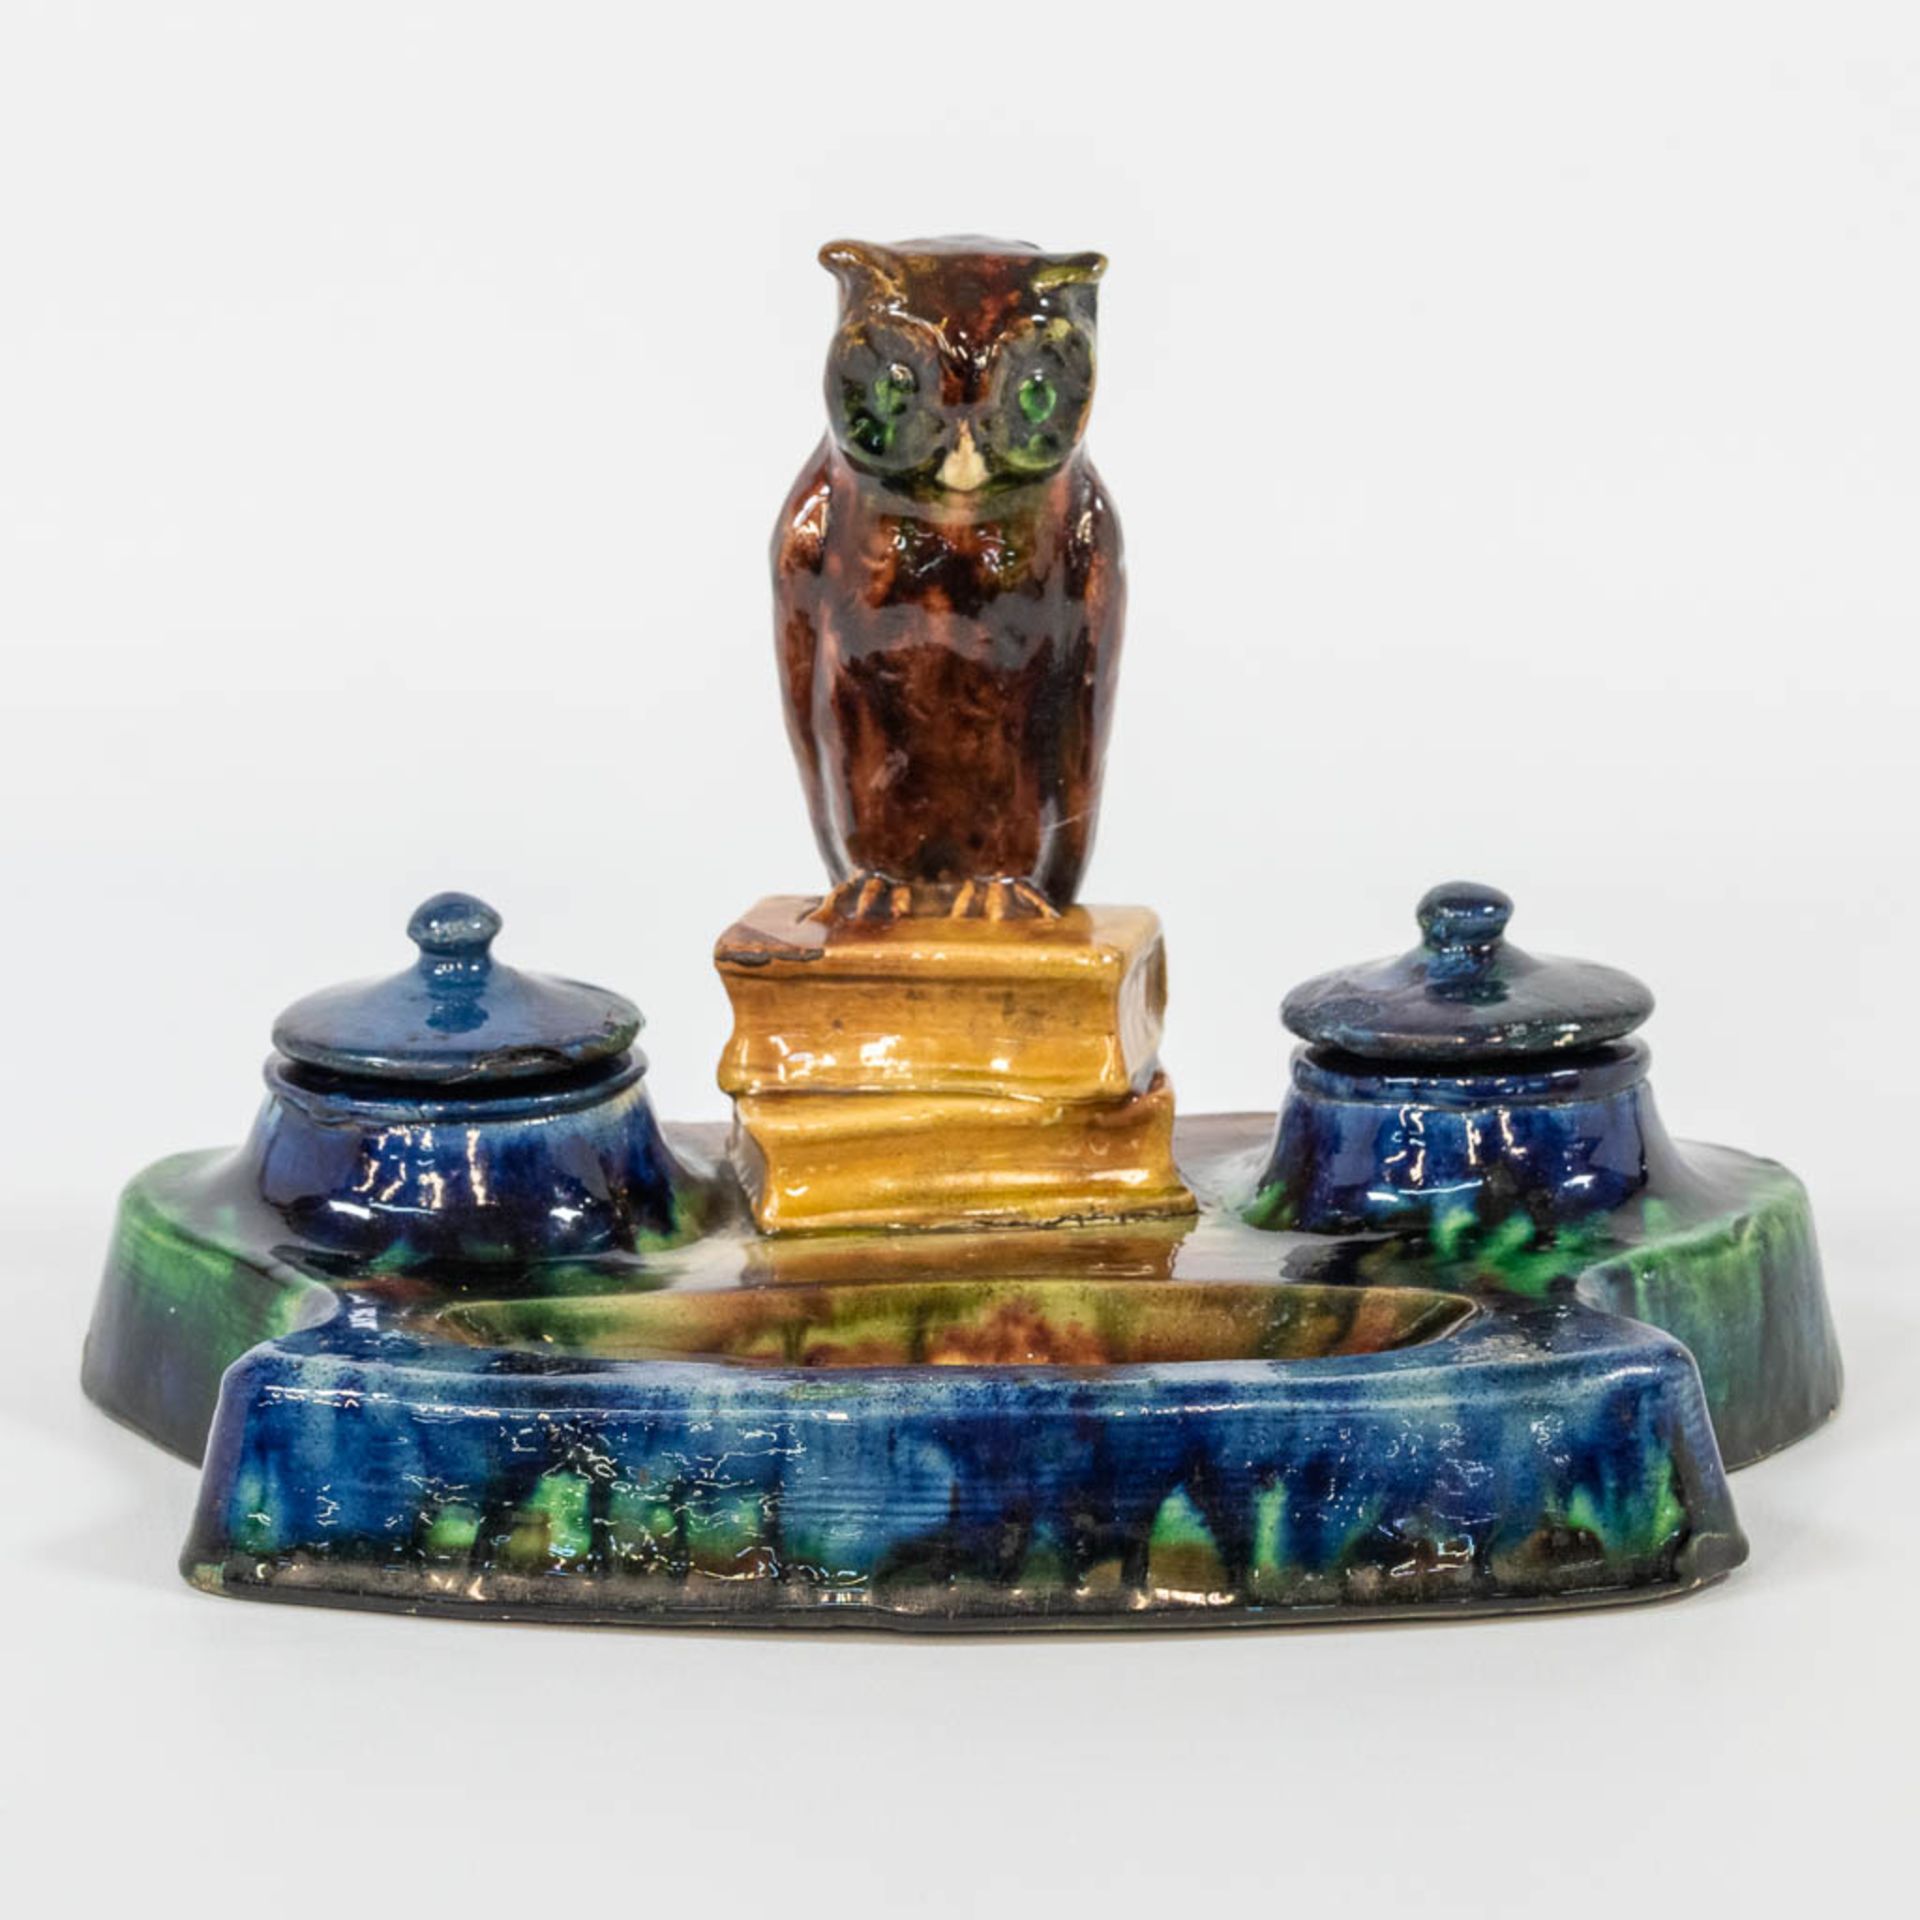 An ink set made of Flemish Earthenware with an owl figurine and marked Made in Belgium, most likely 